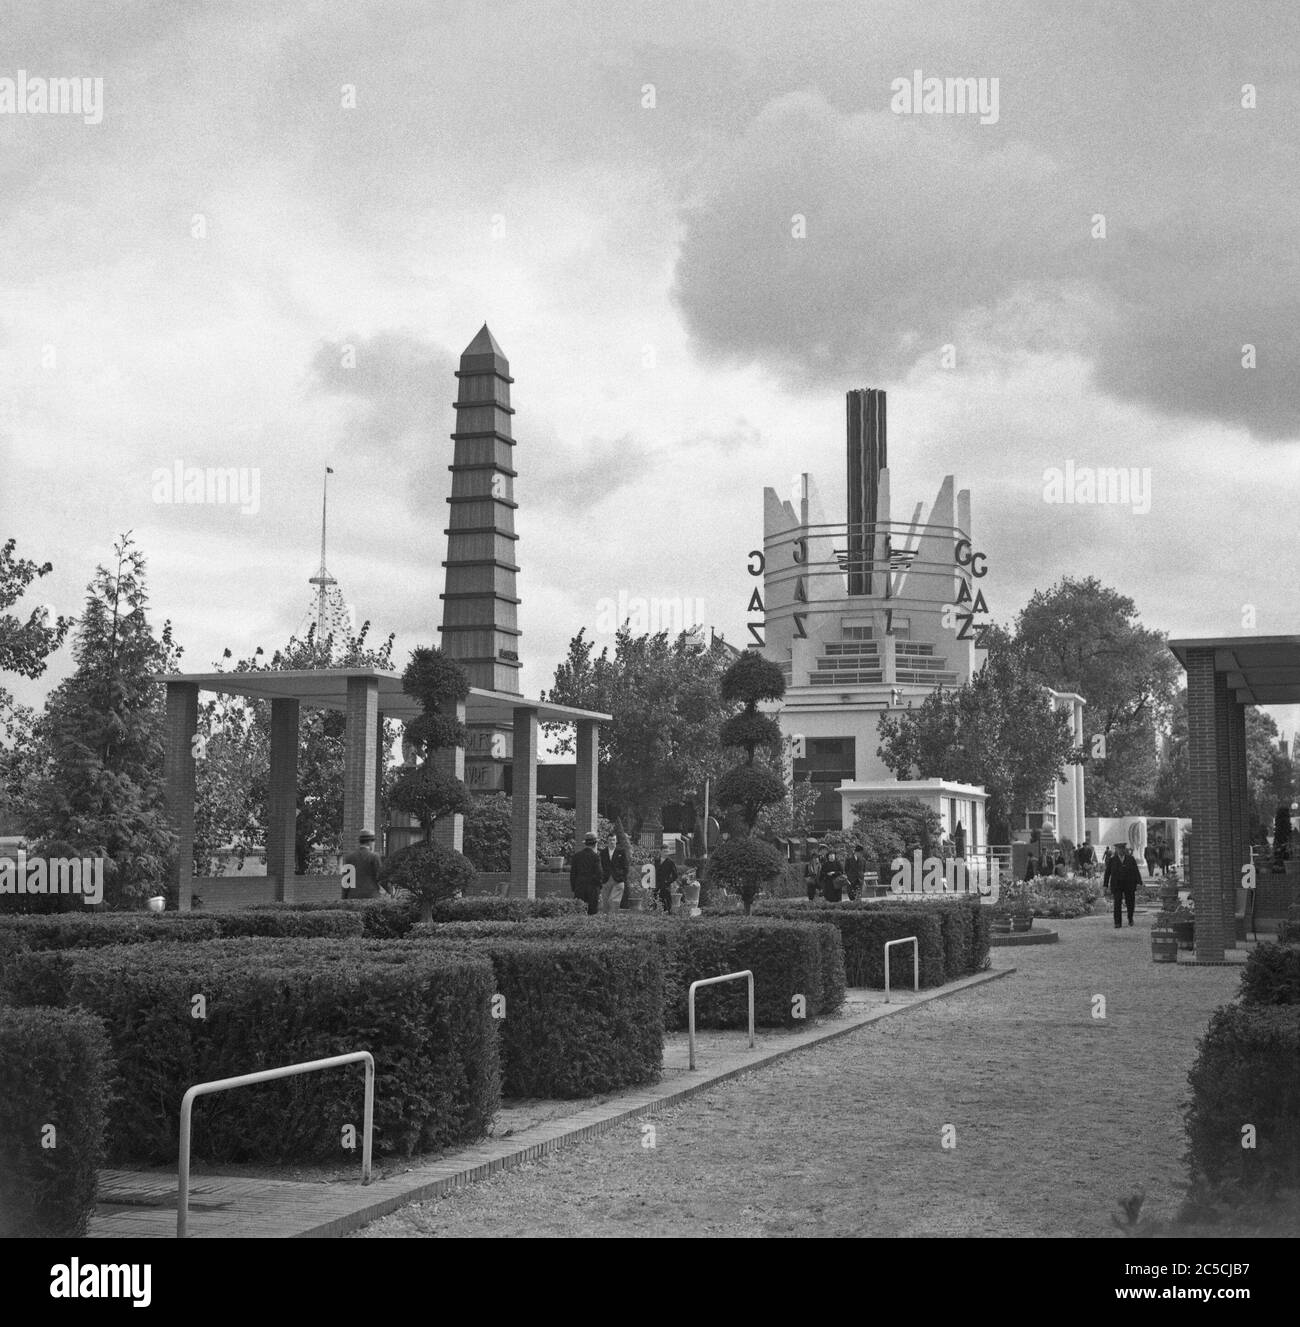 A view of the 1937 Expo (World's Fair or Exposition) held in Paris, France – here people are strolling in the 'Sections des Jardins', gardens alongside the River Seine. In the background is a pavilion for the French power company Gaz. Stock Photo